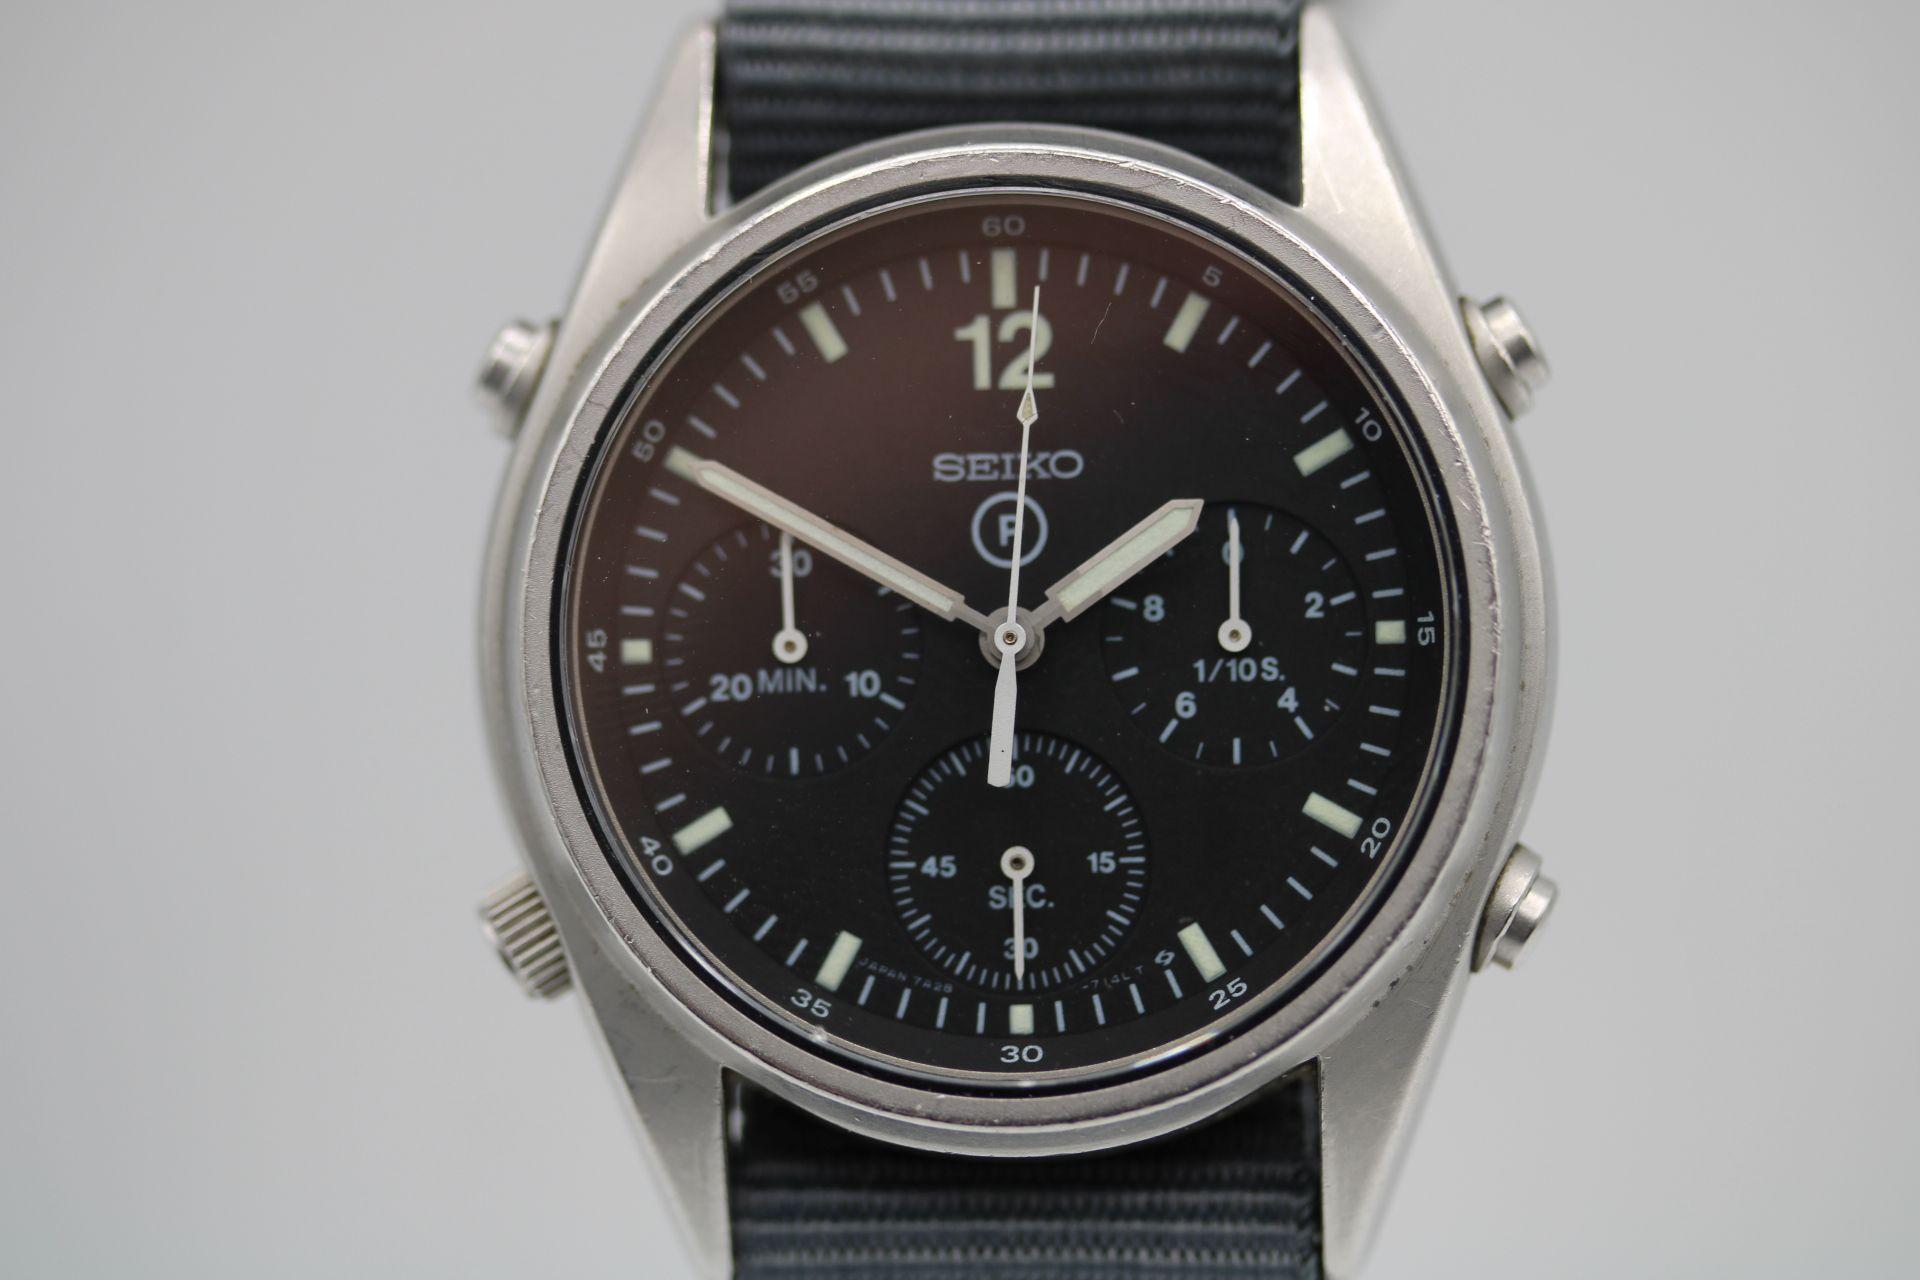 Watch: Seiko Generation 1 7A28-7120 c.1990 Watch Only
Stock Number: CHW5274
Price: £995.00

Original, working Generation 1 Seiko Chronograph made for the British RAF in 1990. Having been used in service as a tool watch will show some signs of age